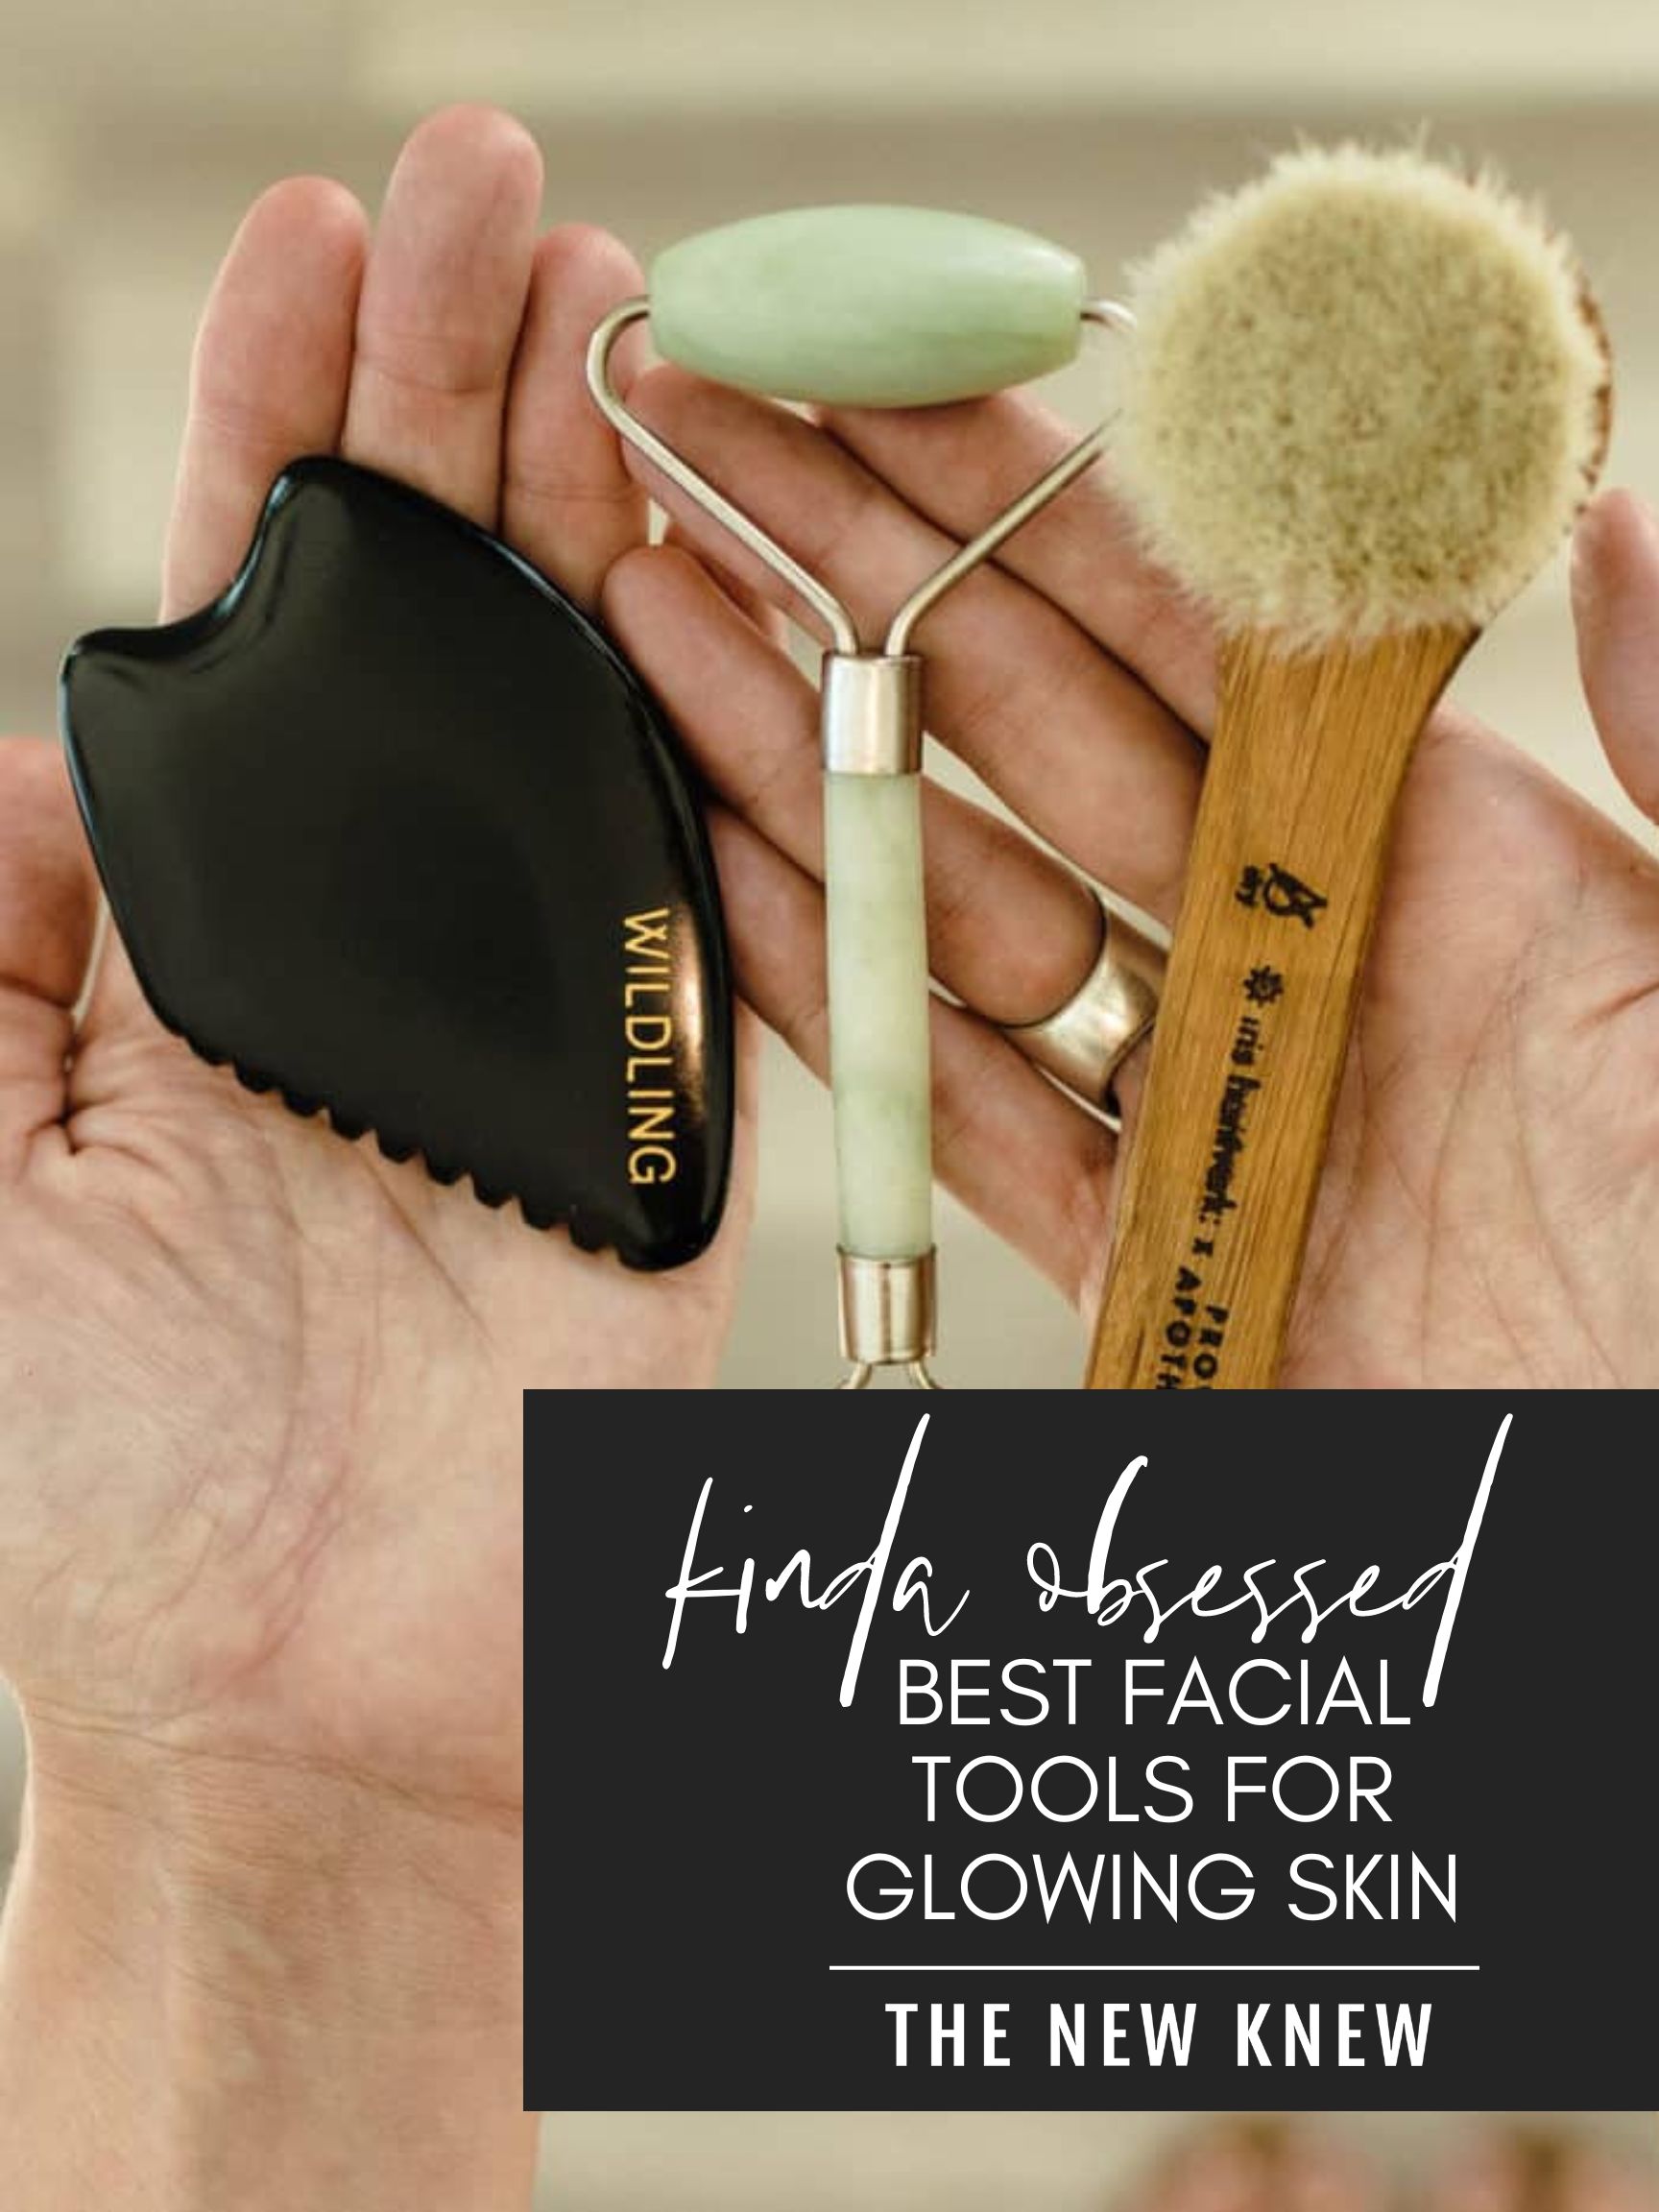 A collection of 3 facial tools held in her hands 